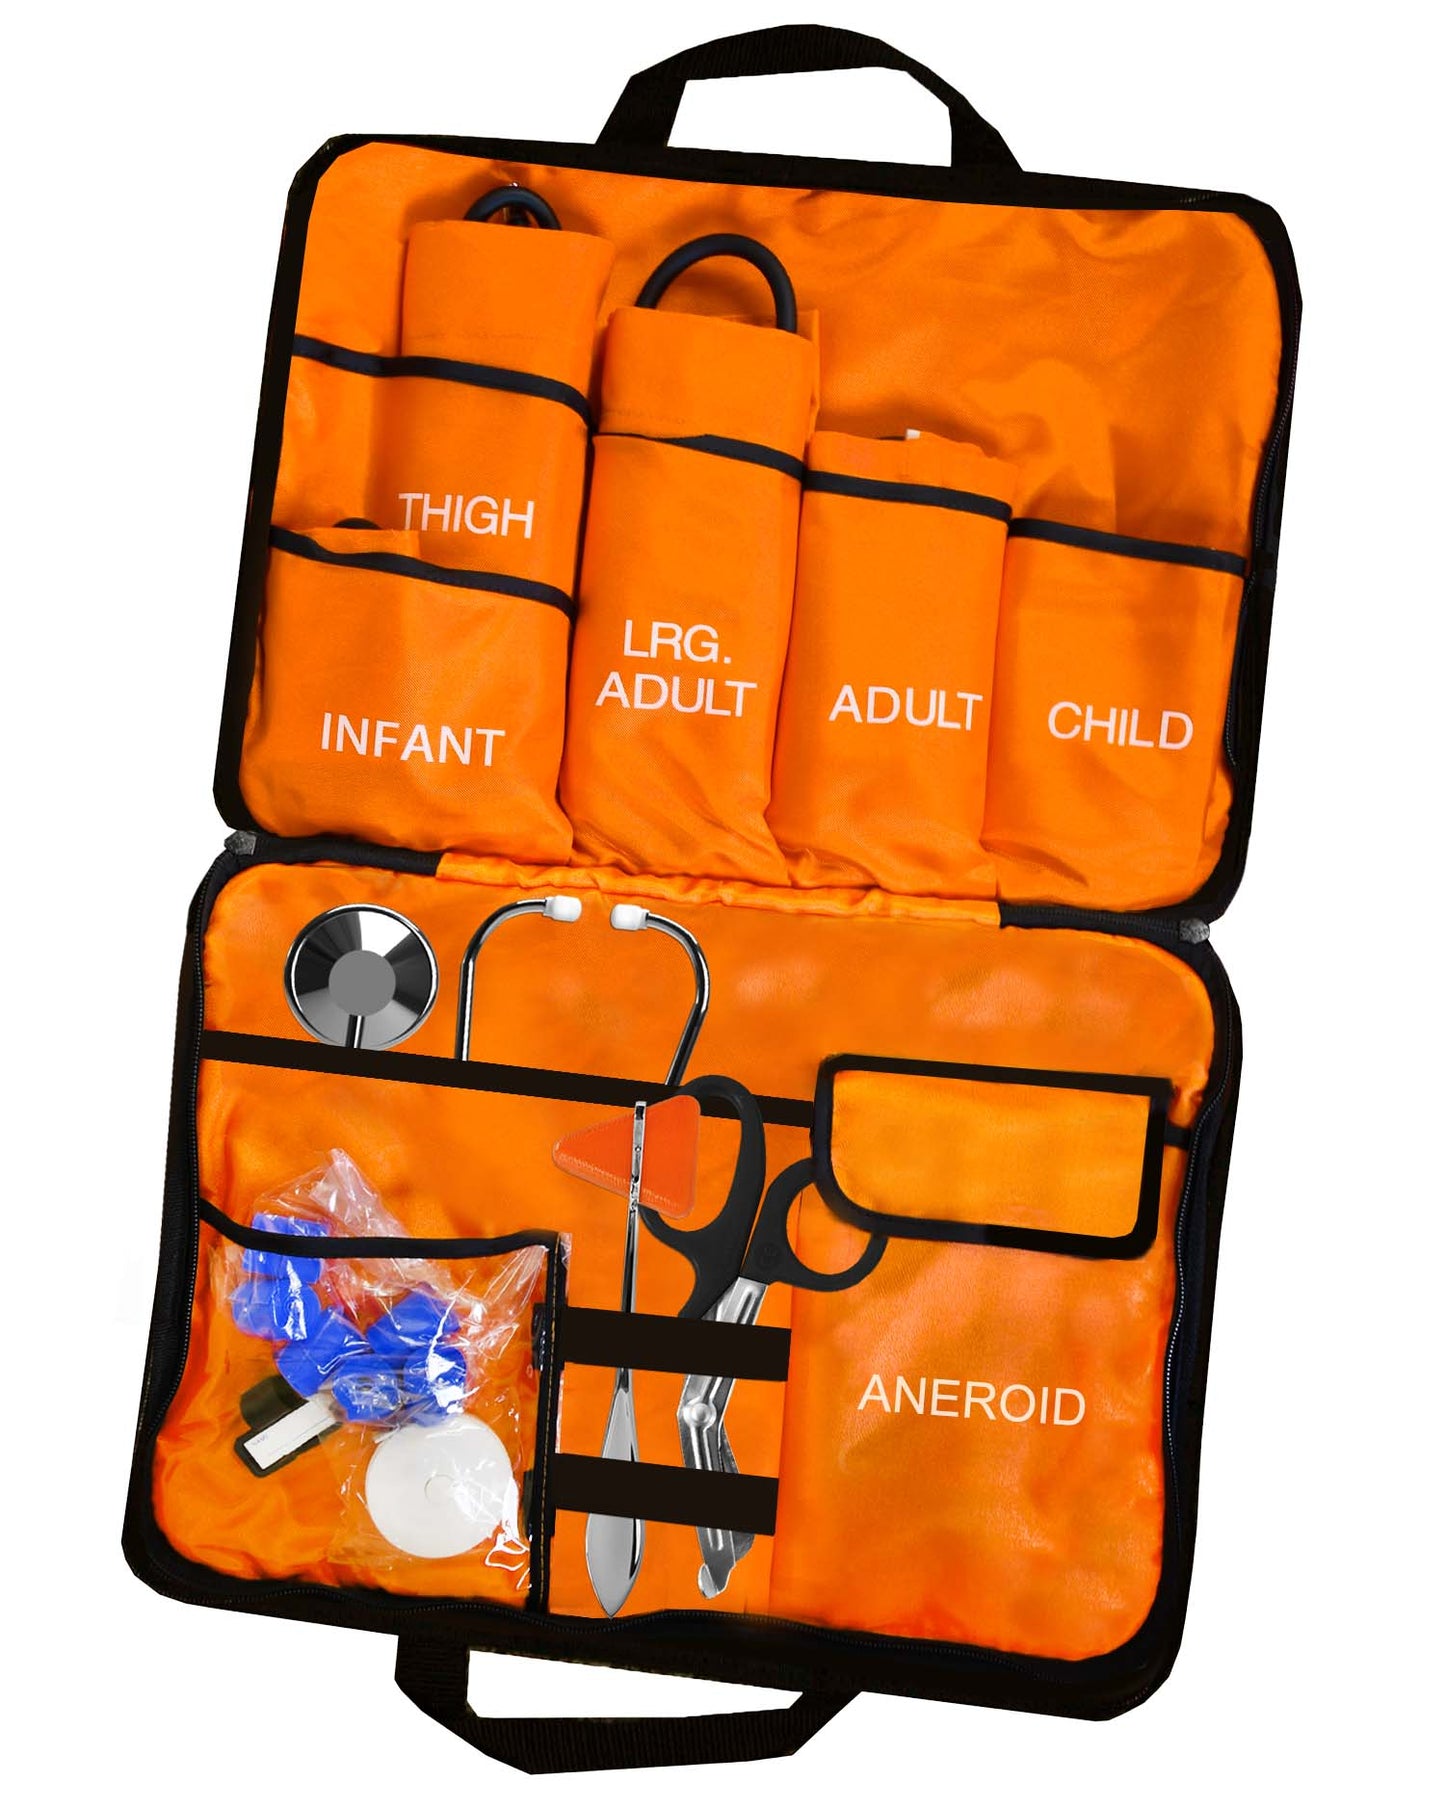 Shop Latest Deals  Emergency Medical Products